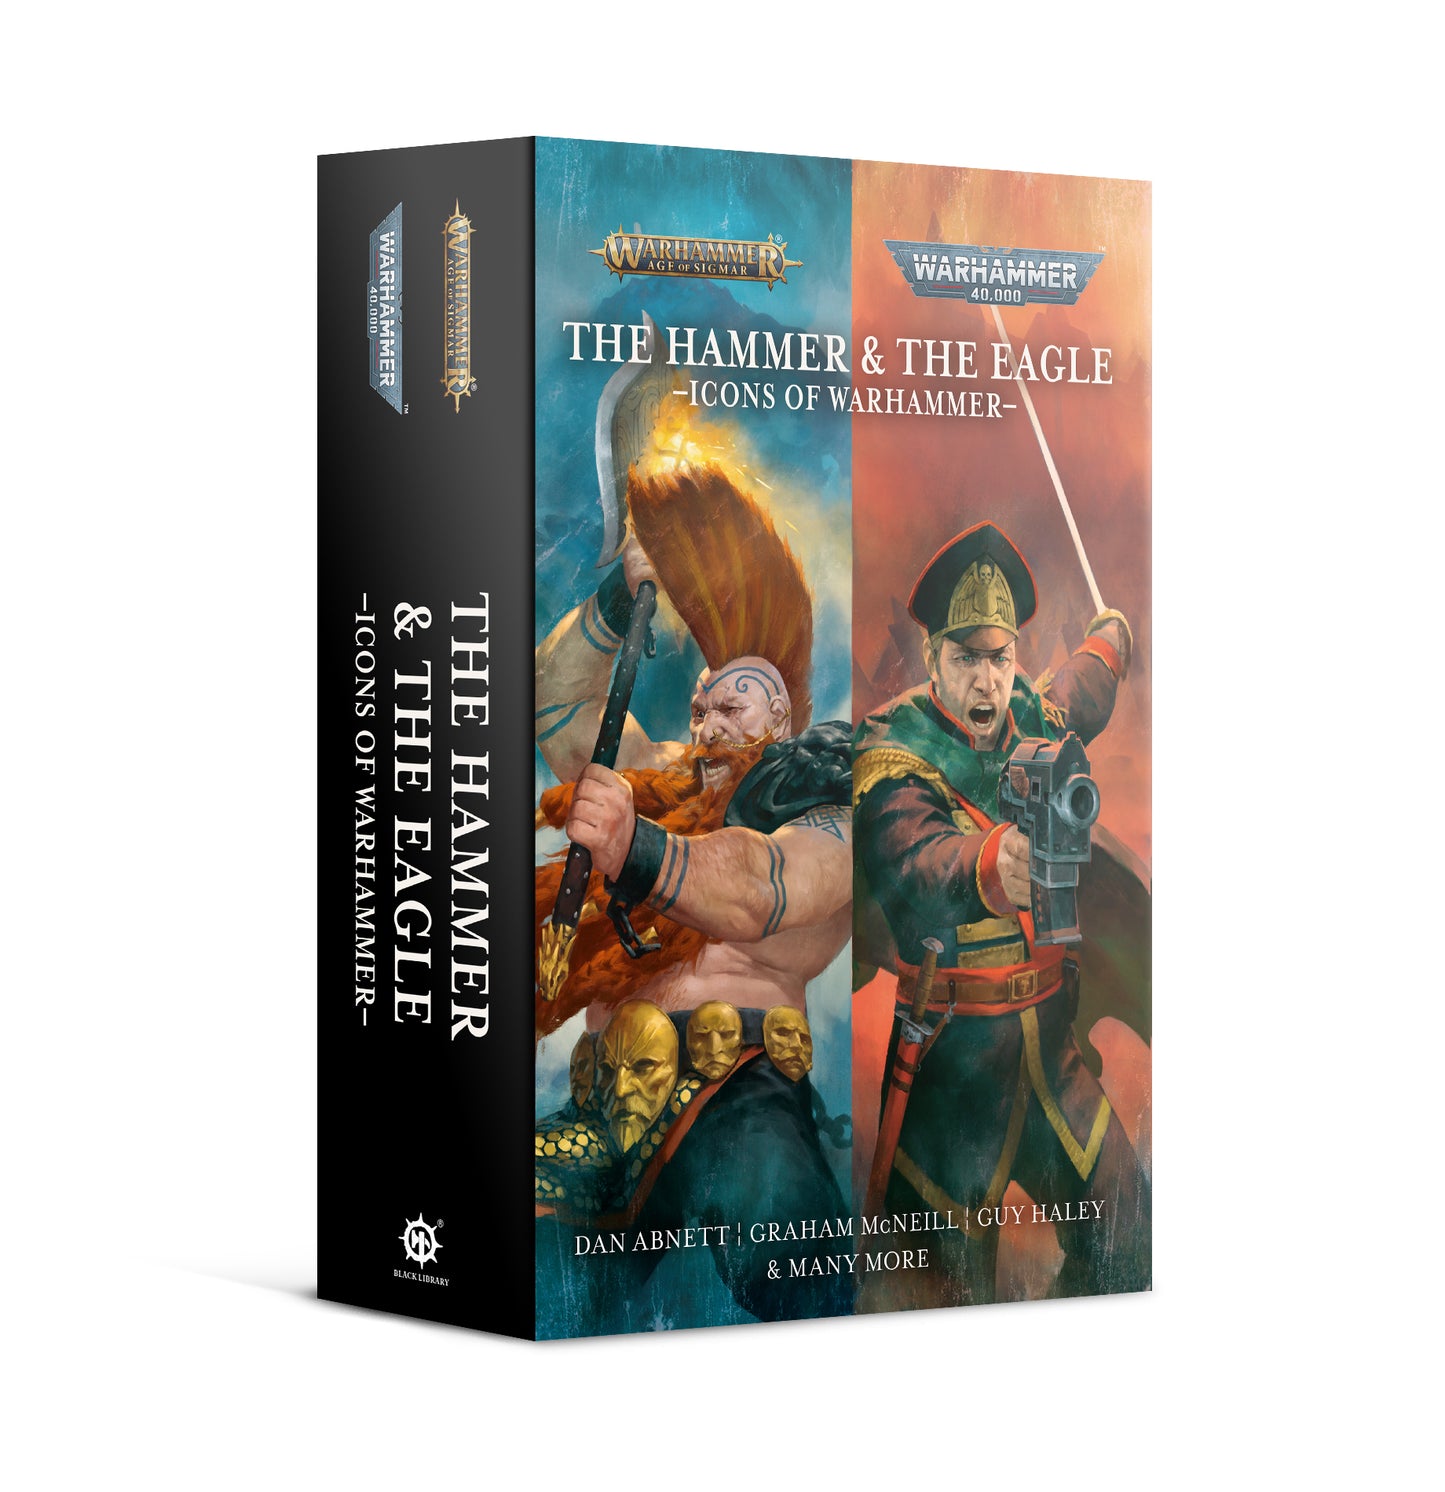 The Hammer And The Eagle (Paperback)